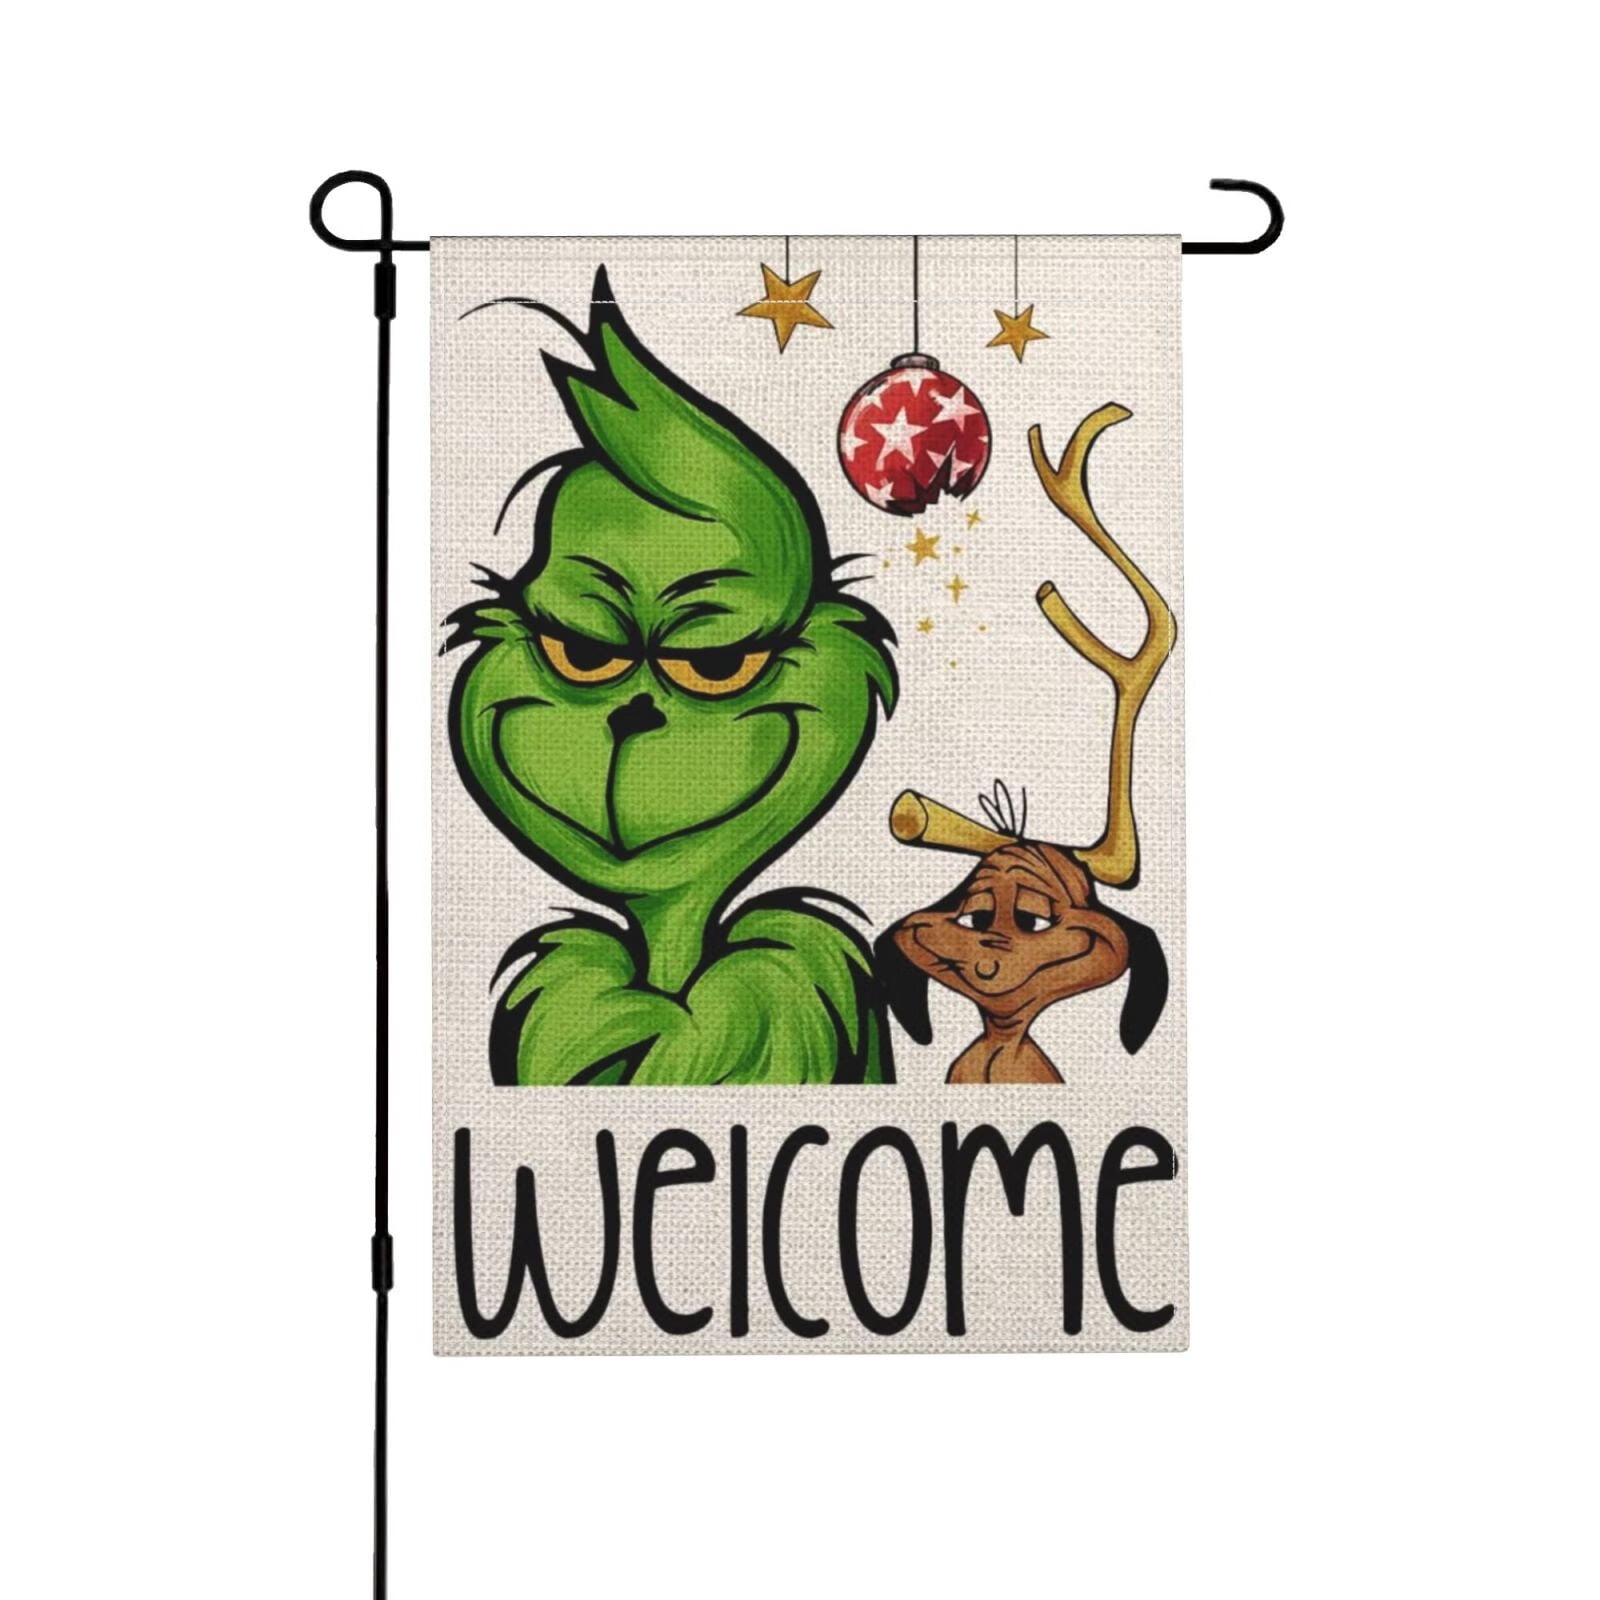 Home Decorative Merry Christmas Double Sided Outdoor Garden Flag